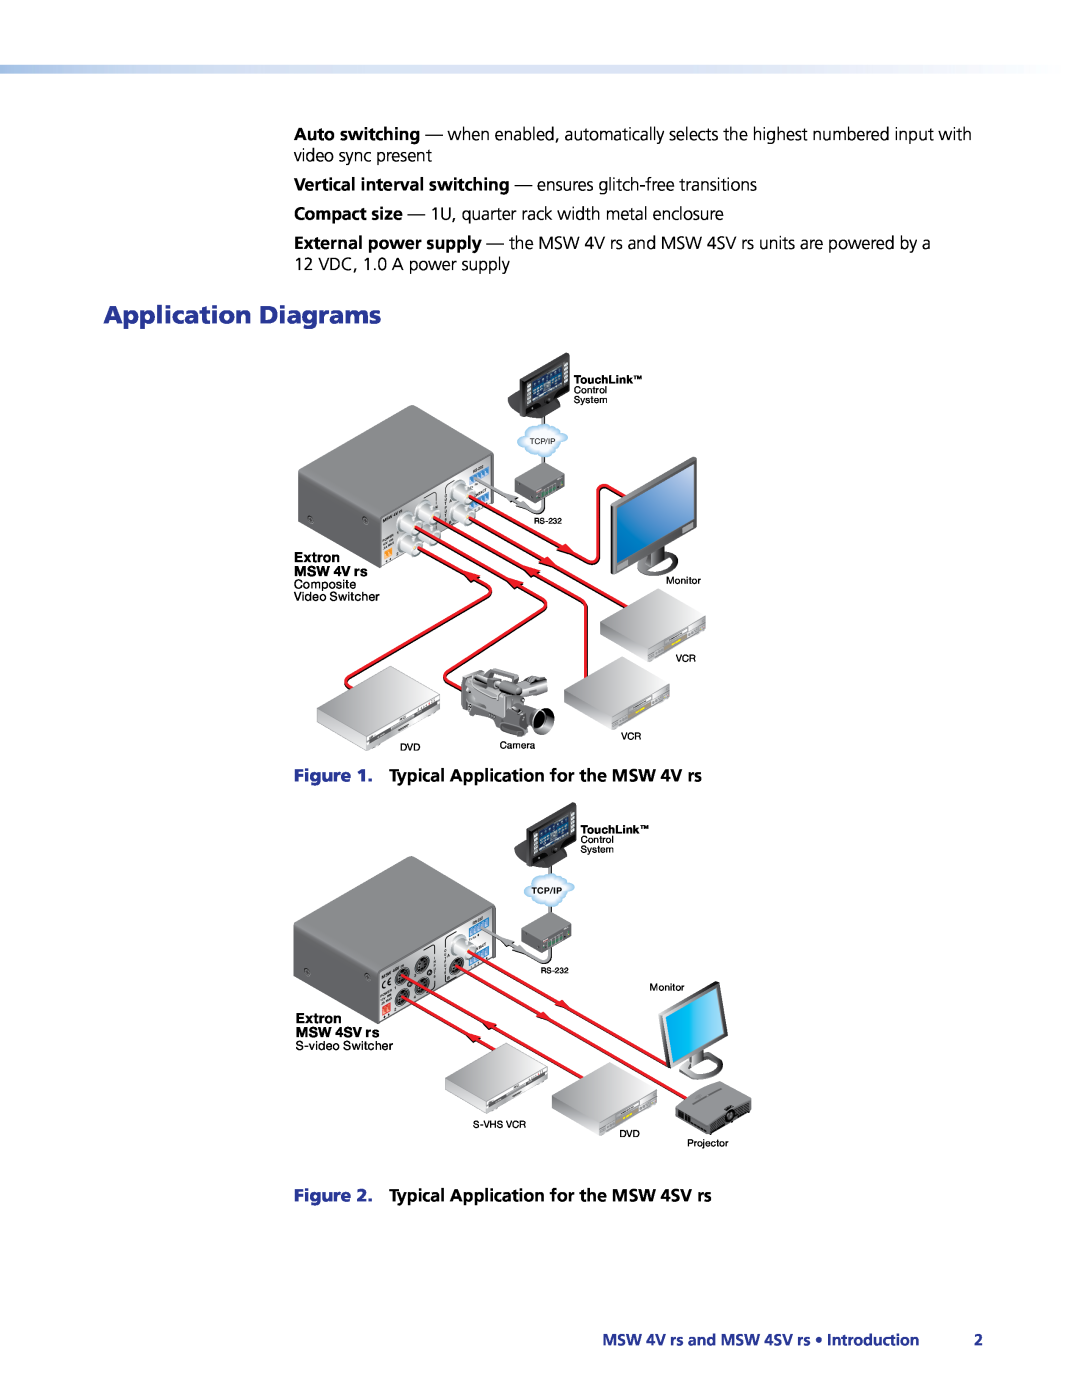 Extron electronic Application Diagrams, Typical Application for the MSW 4V rs, Typical Application for the MSW 4SV rs 